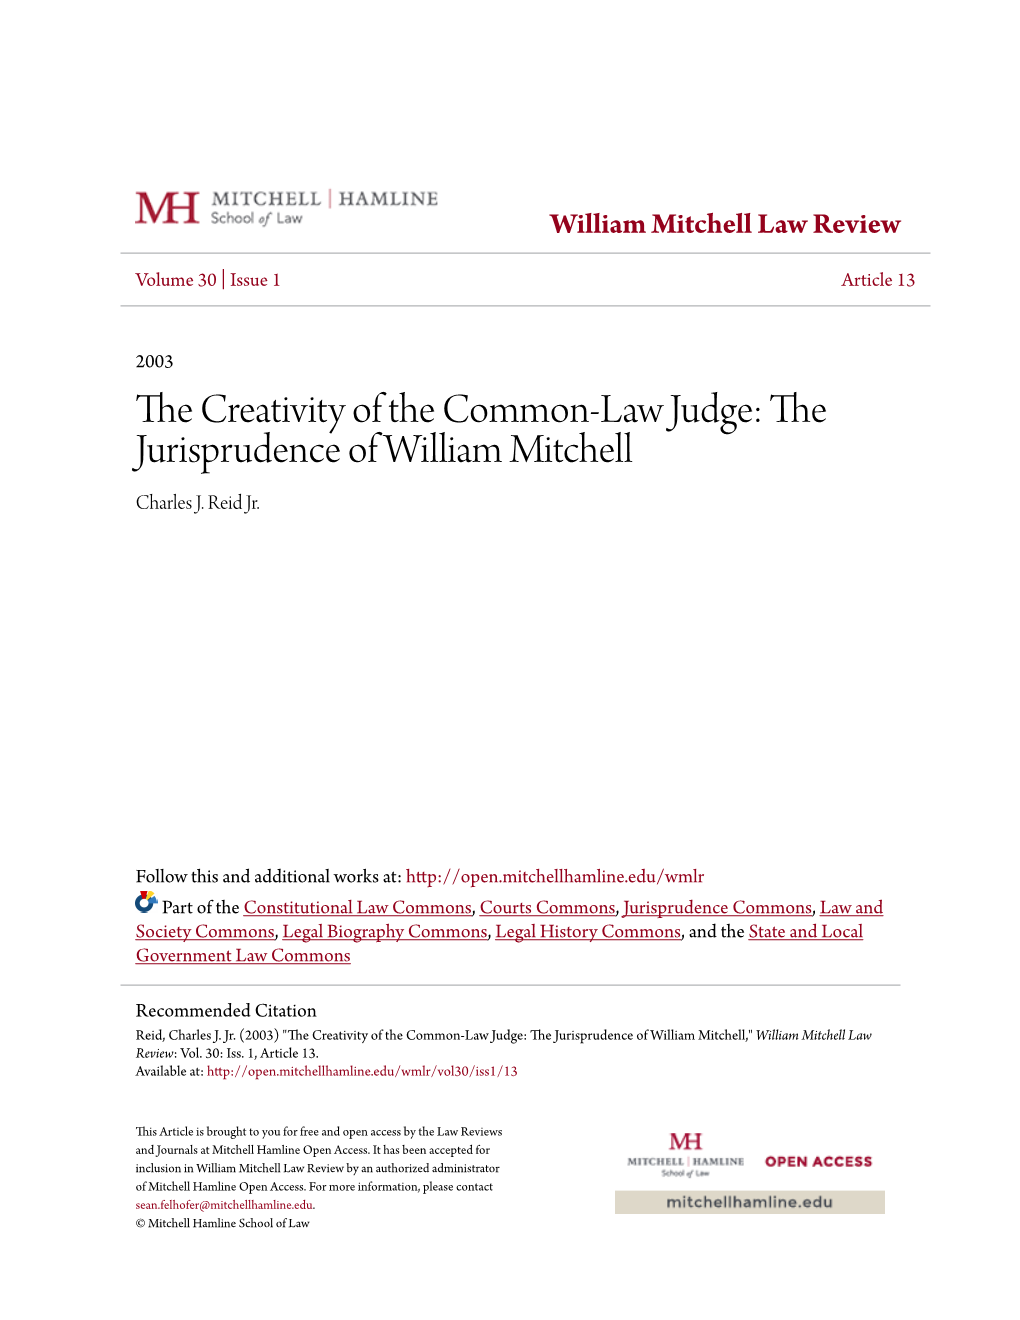 The Creativity of the Common-Law Judge: the Jurisprudence of Will